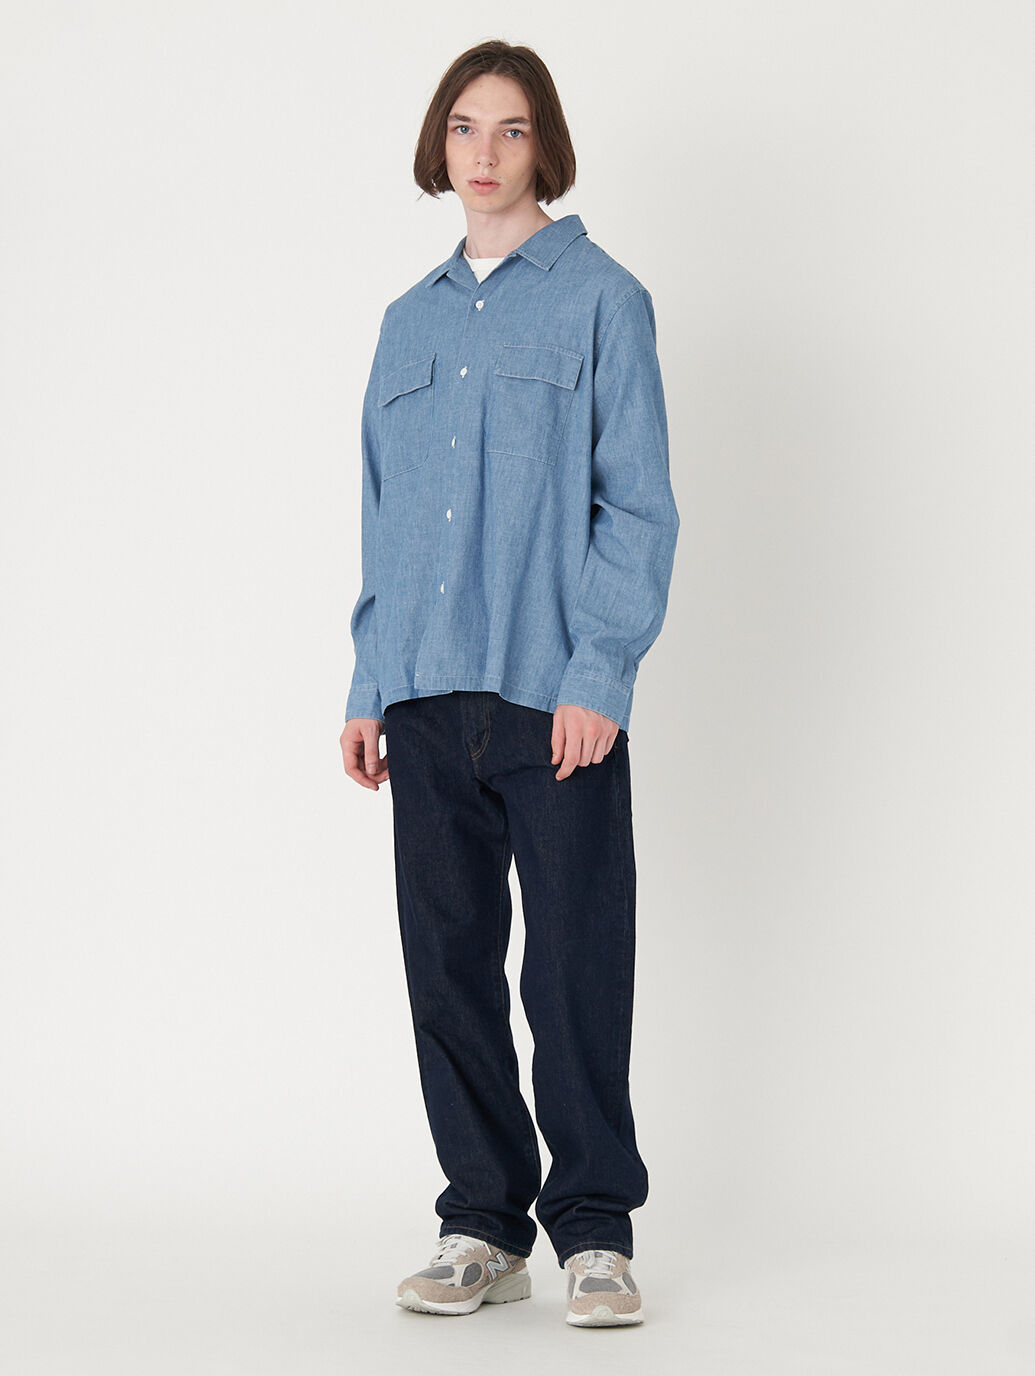 Levi's® Denim FamilyBY LEVI'S® MADE&CRAFTED® シャンブレーシャツ ...